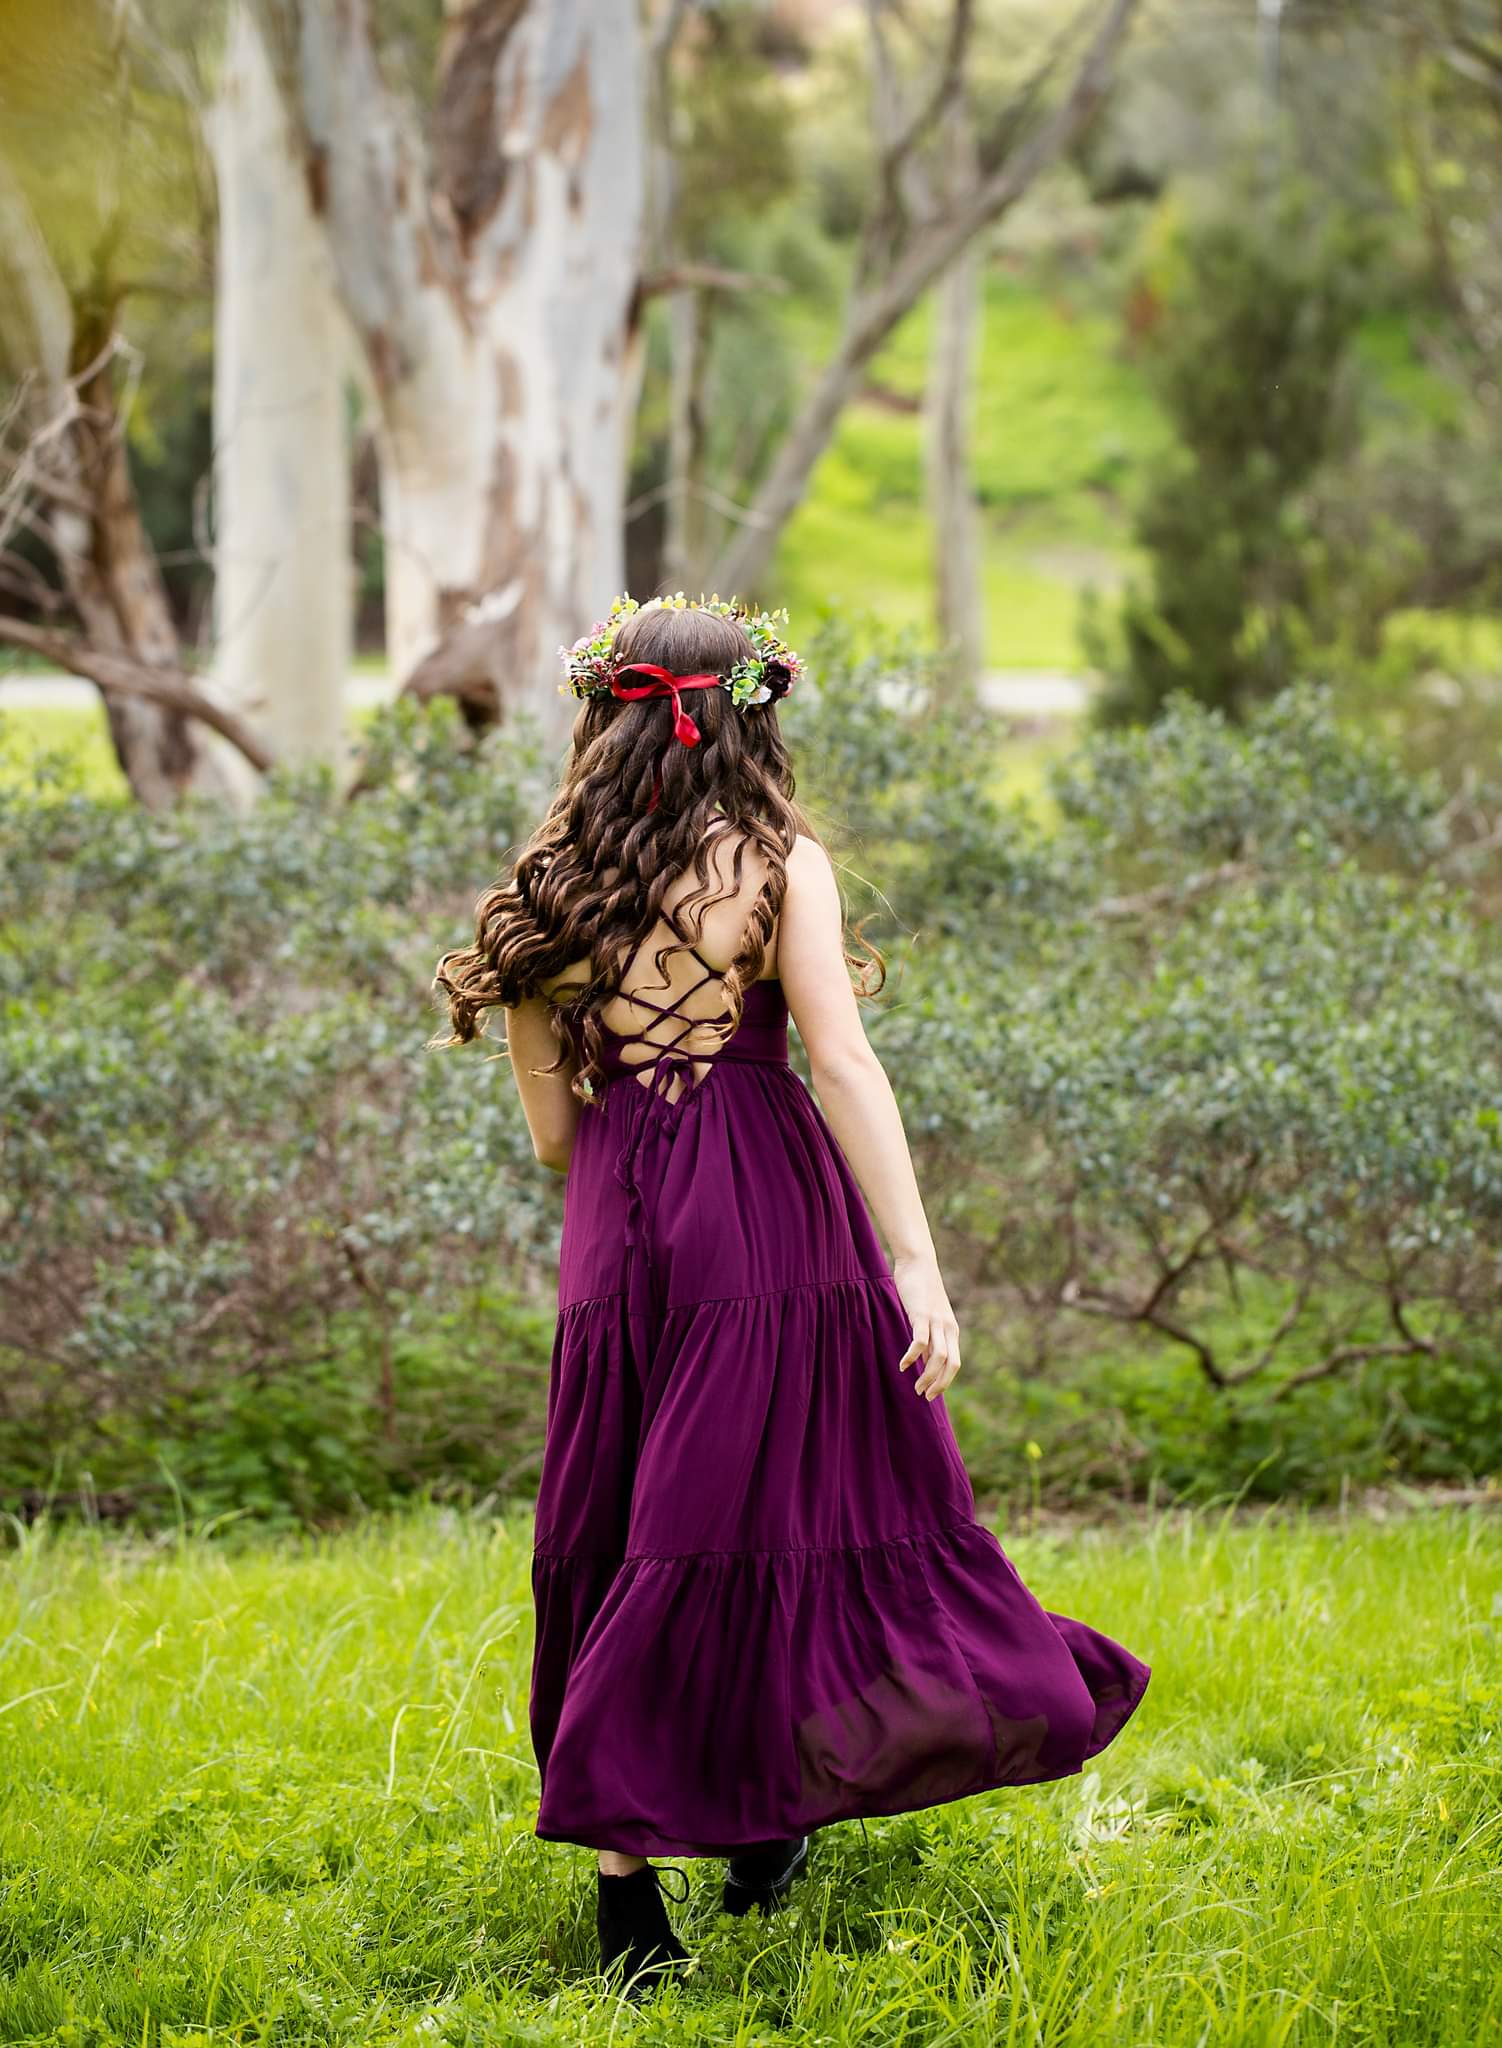 Buy Purple Gown Online In India - Etsy India